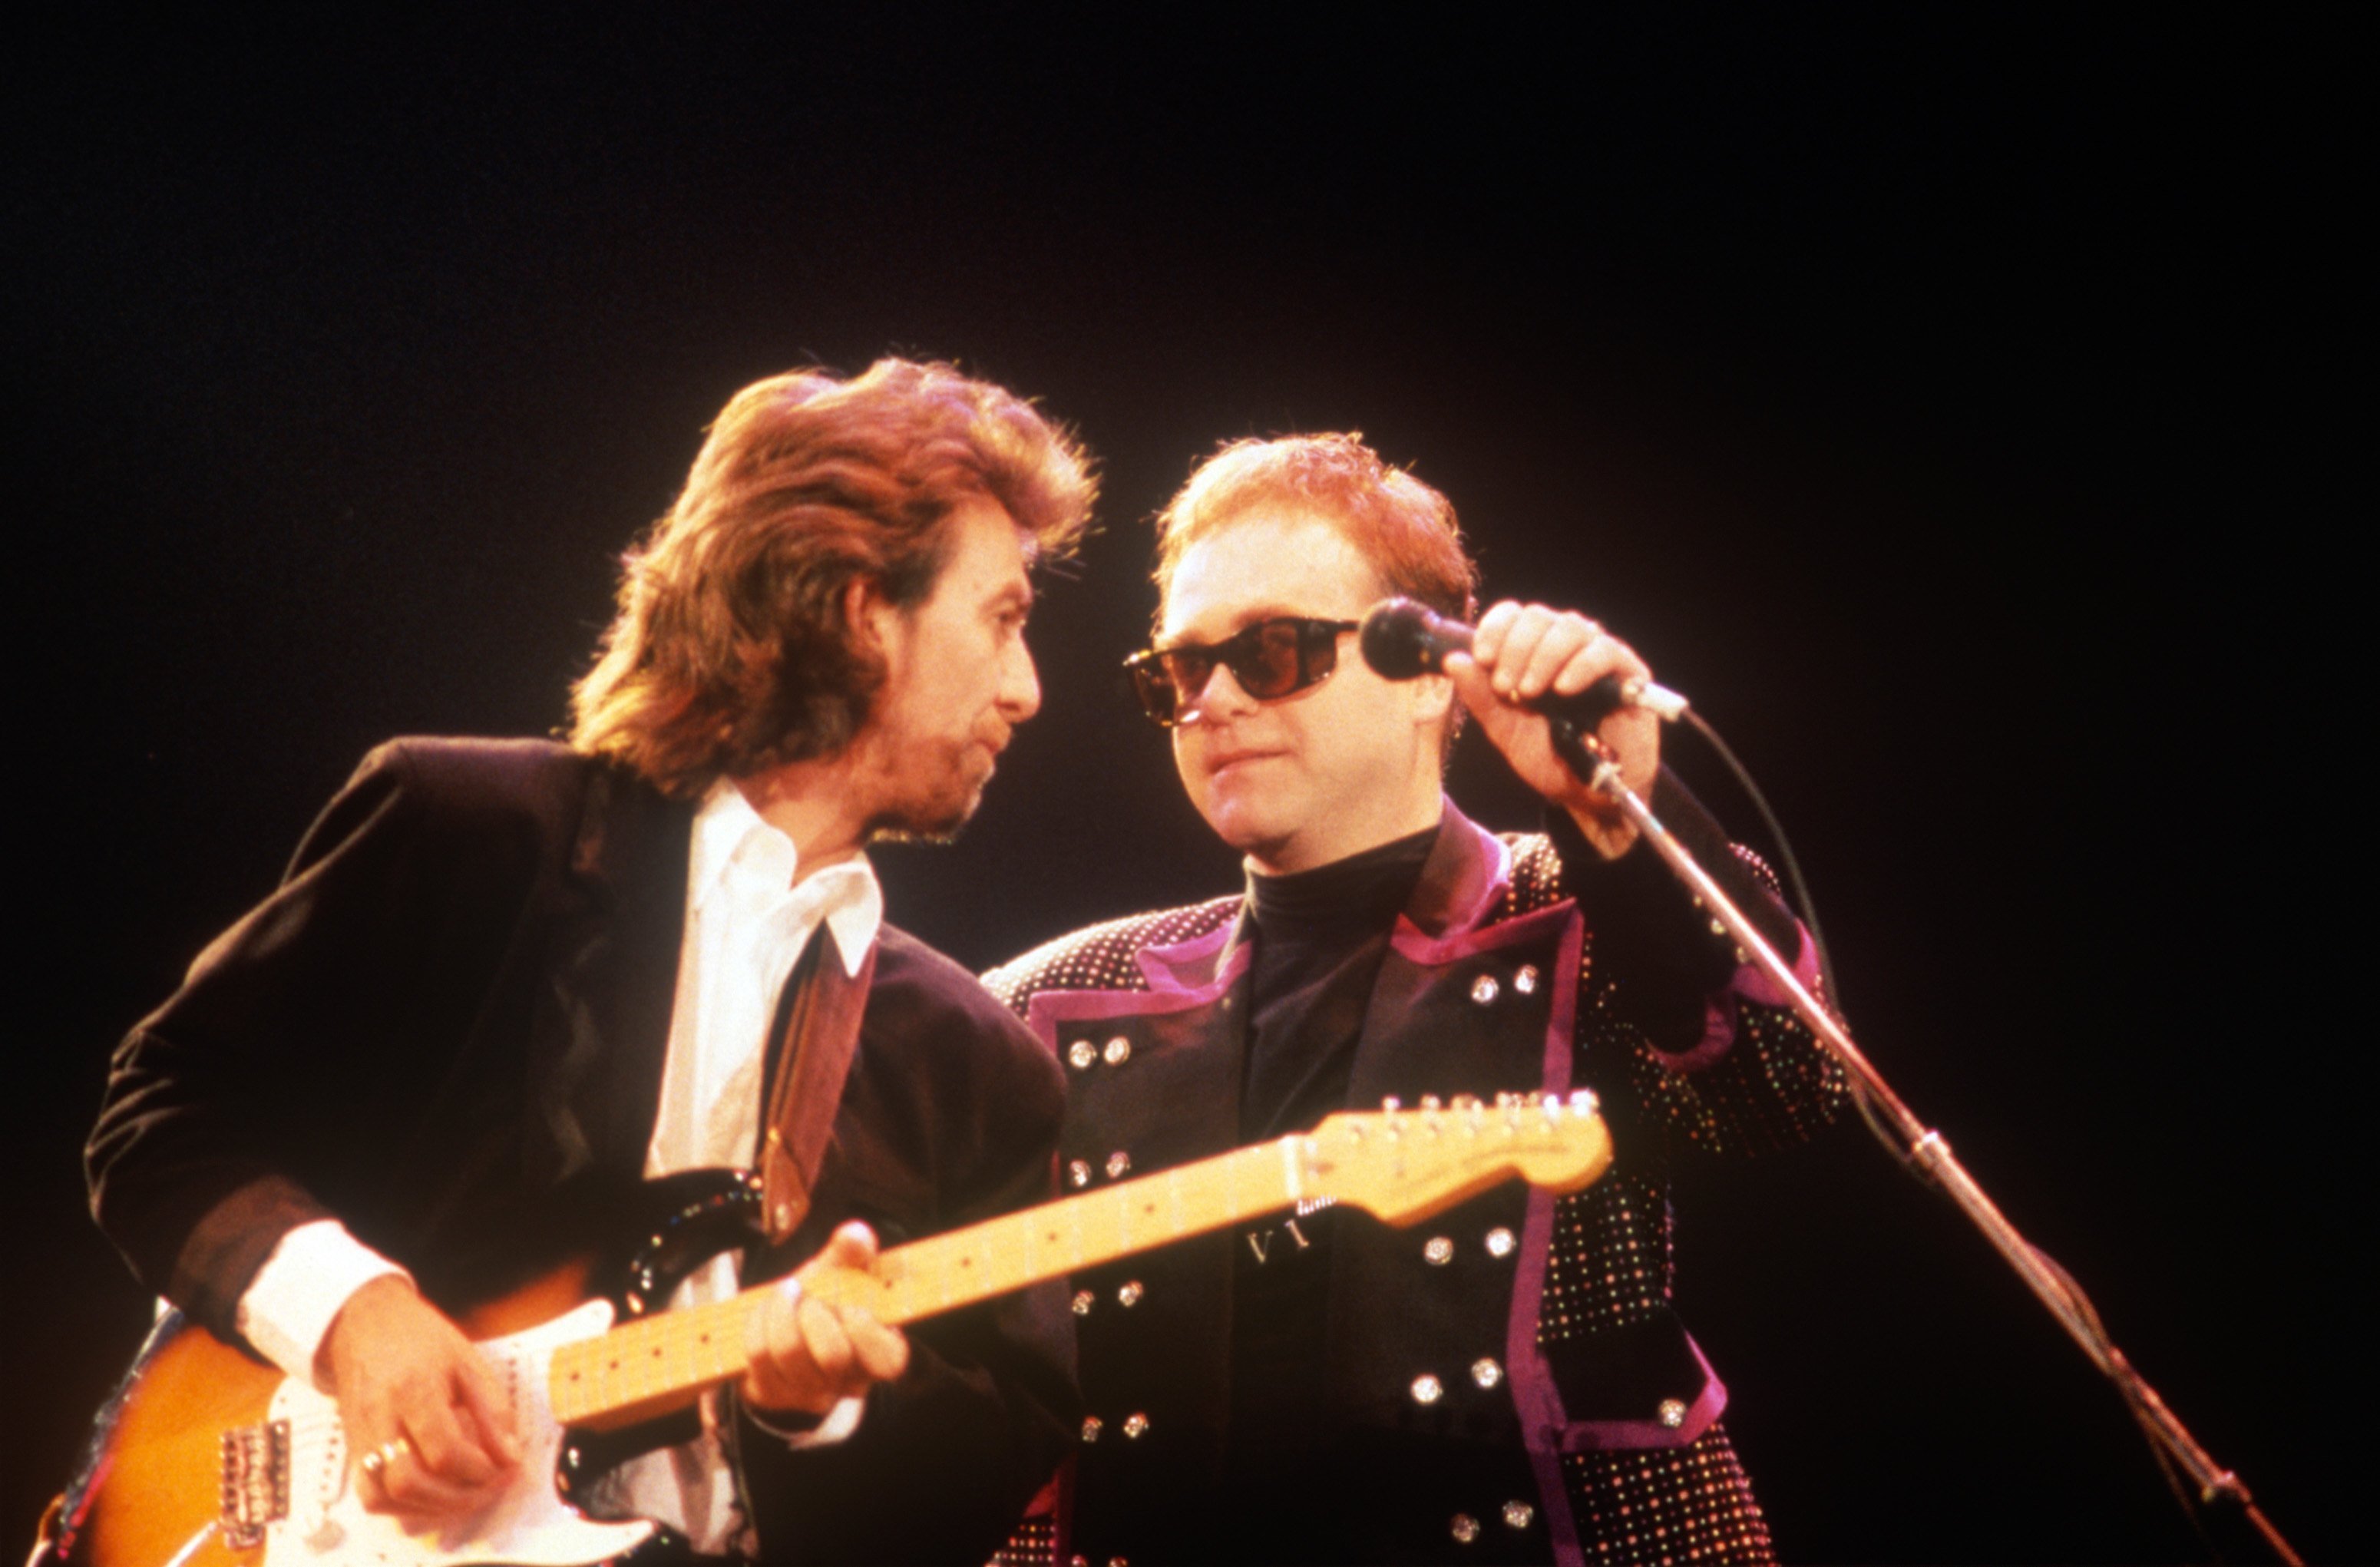 George Harrison and Elton John perform at the P:rince's Trust Concert in London, England, in 1987